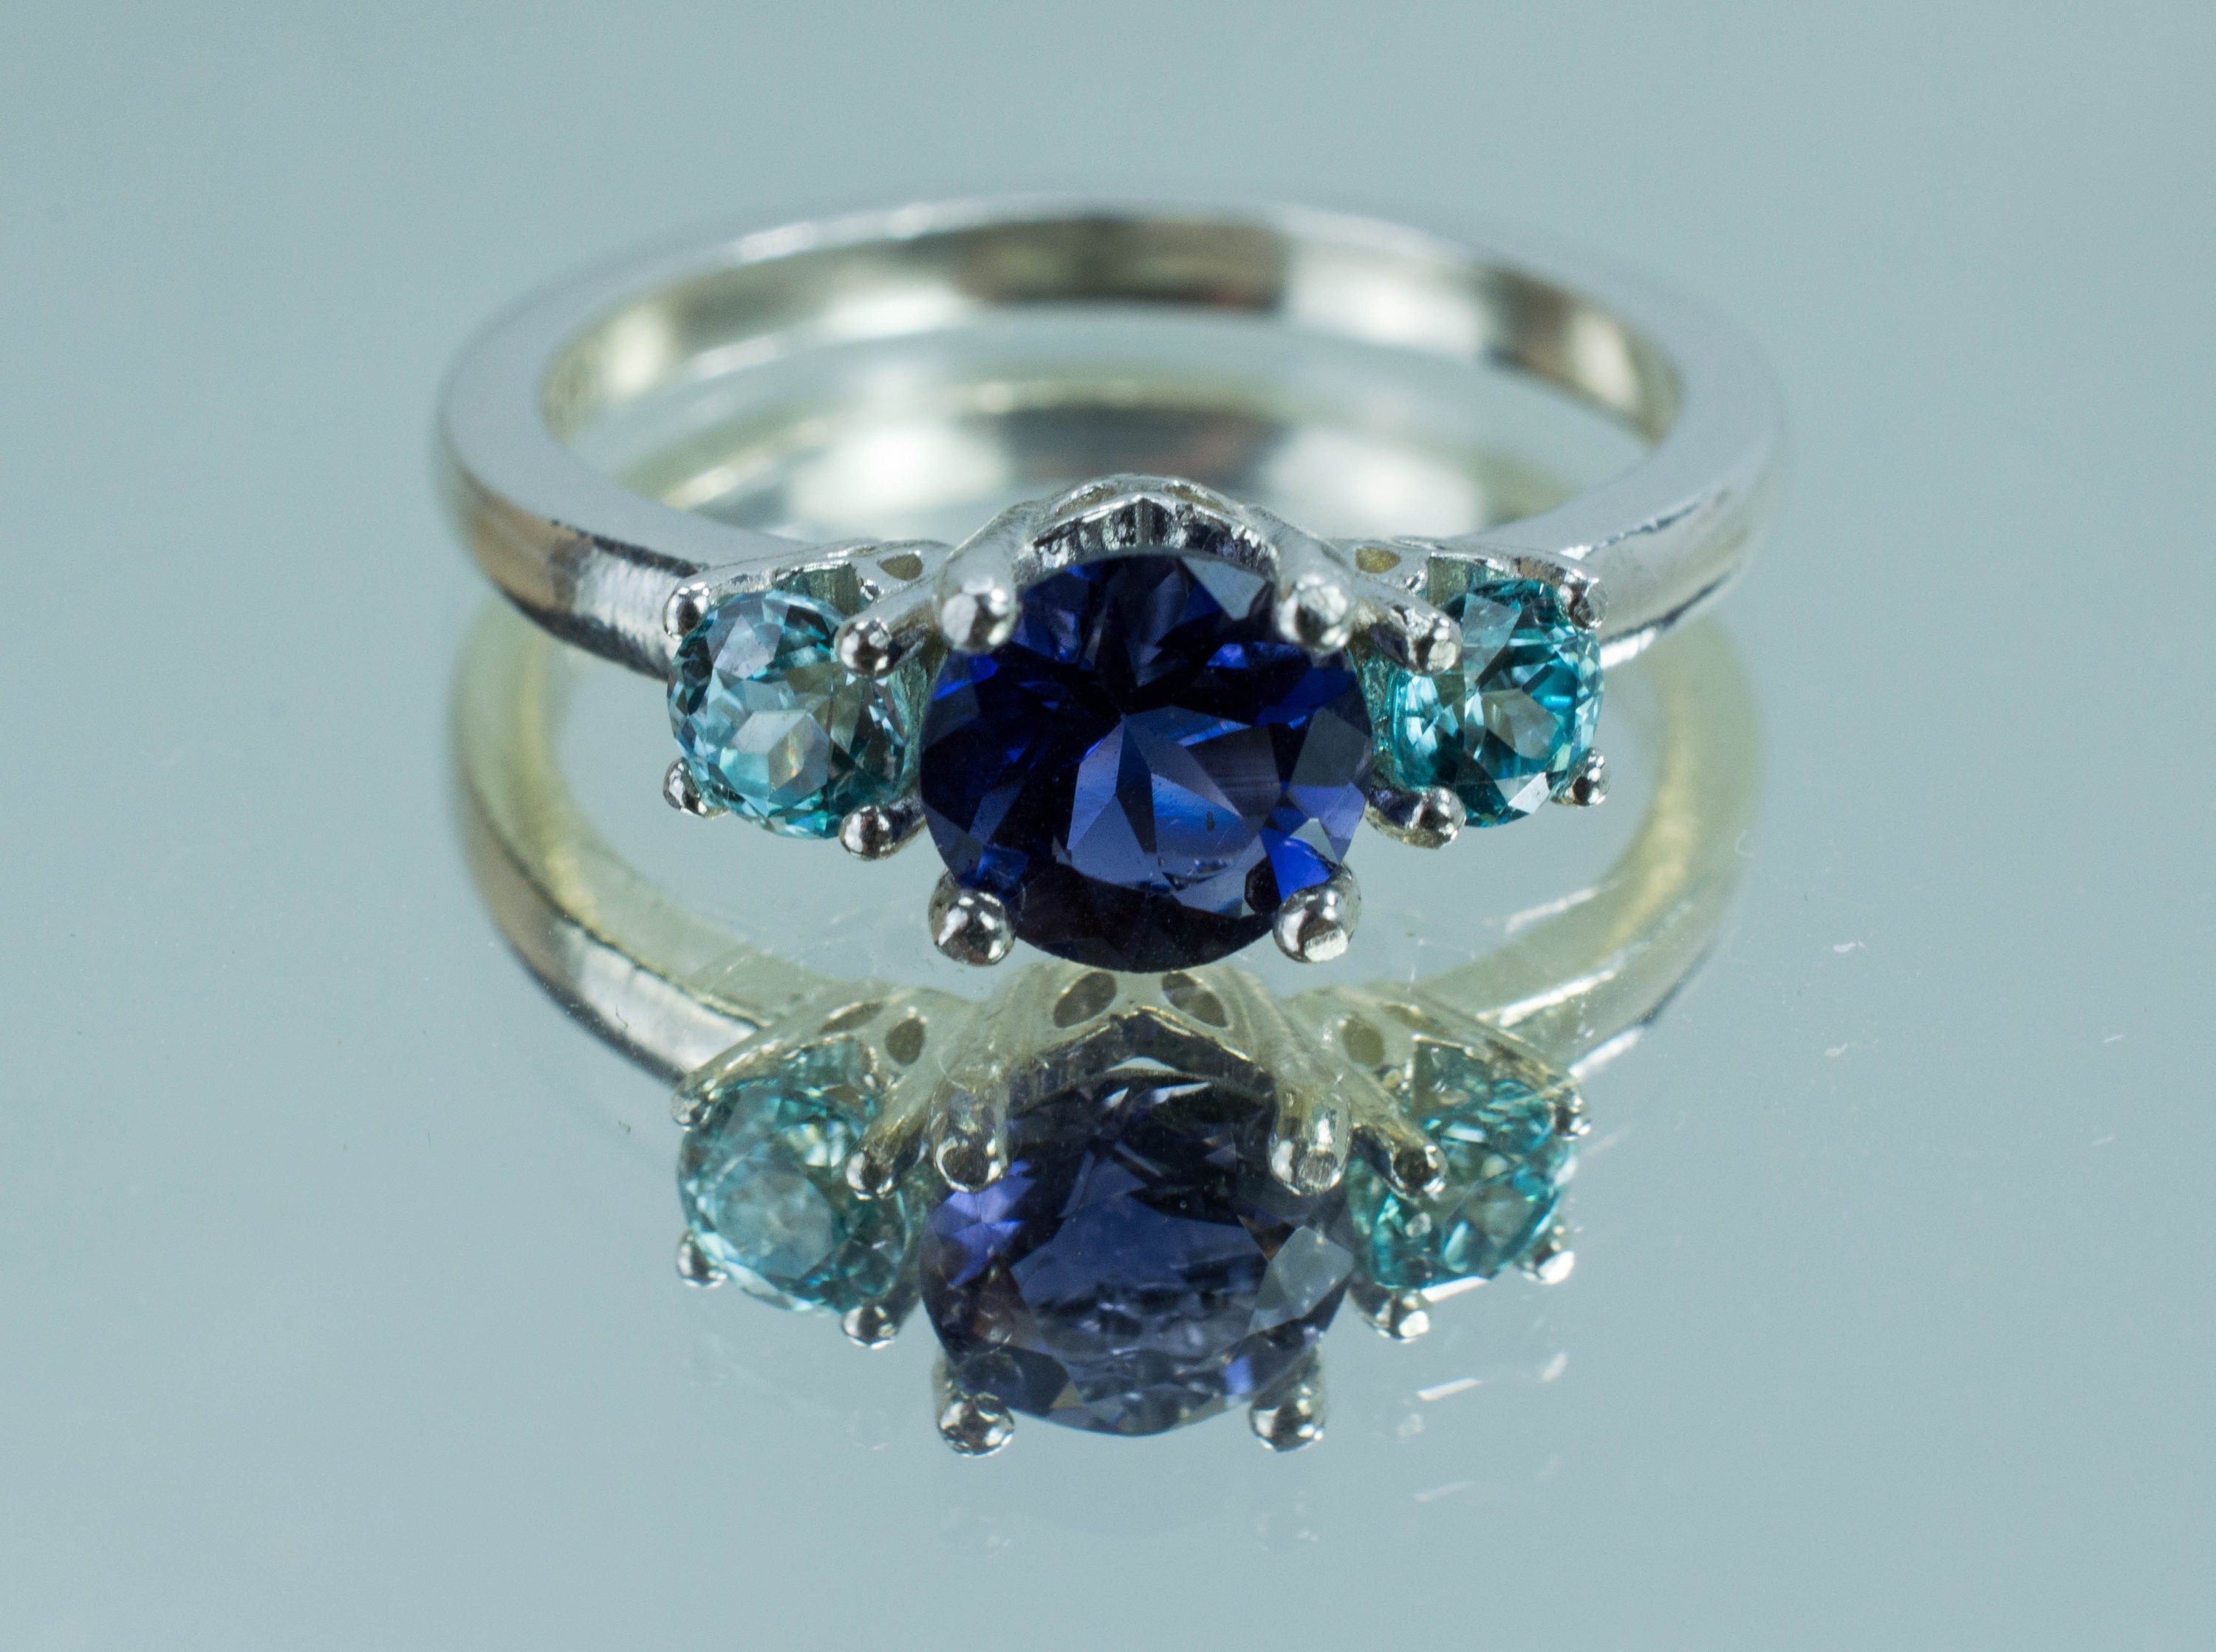 Iolite and Blue Zircon Ring; Genuine Iolite and Zircon; Iolite Ring; Blue Zircon Ring - Mark Oliver Gems